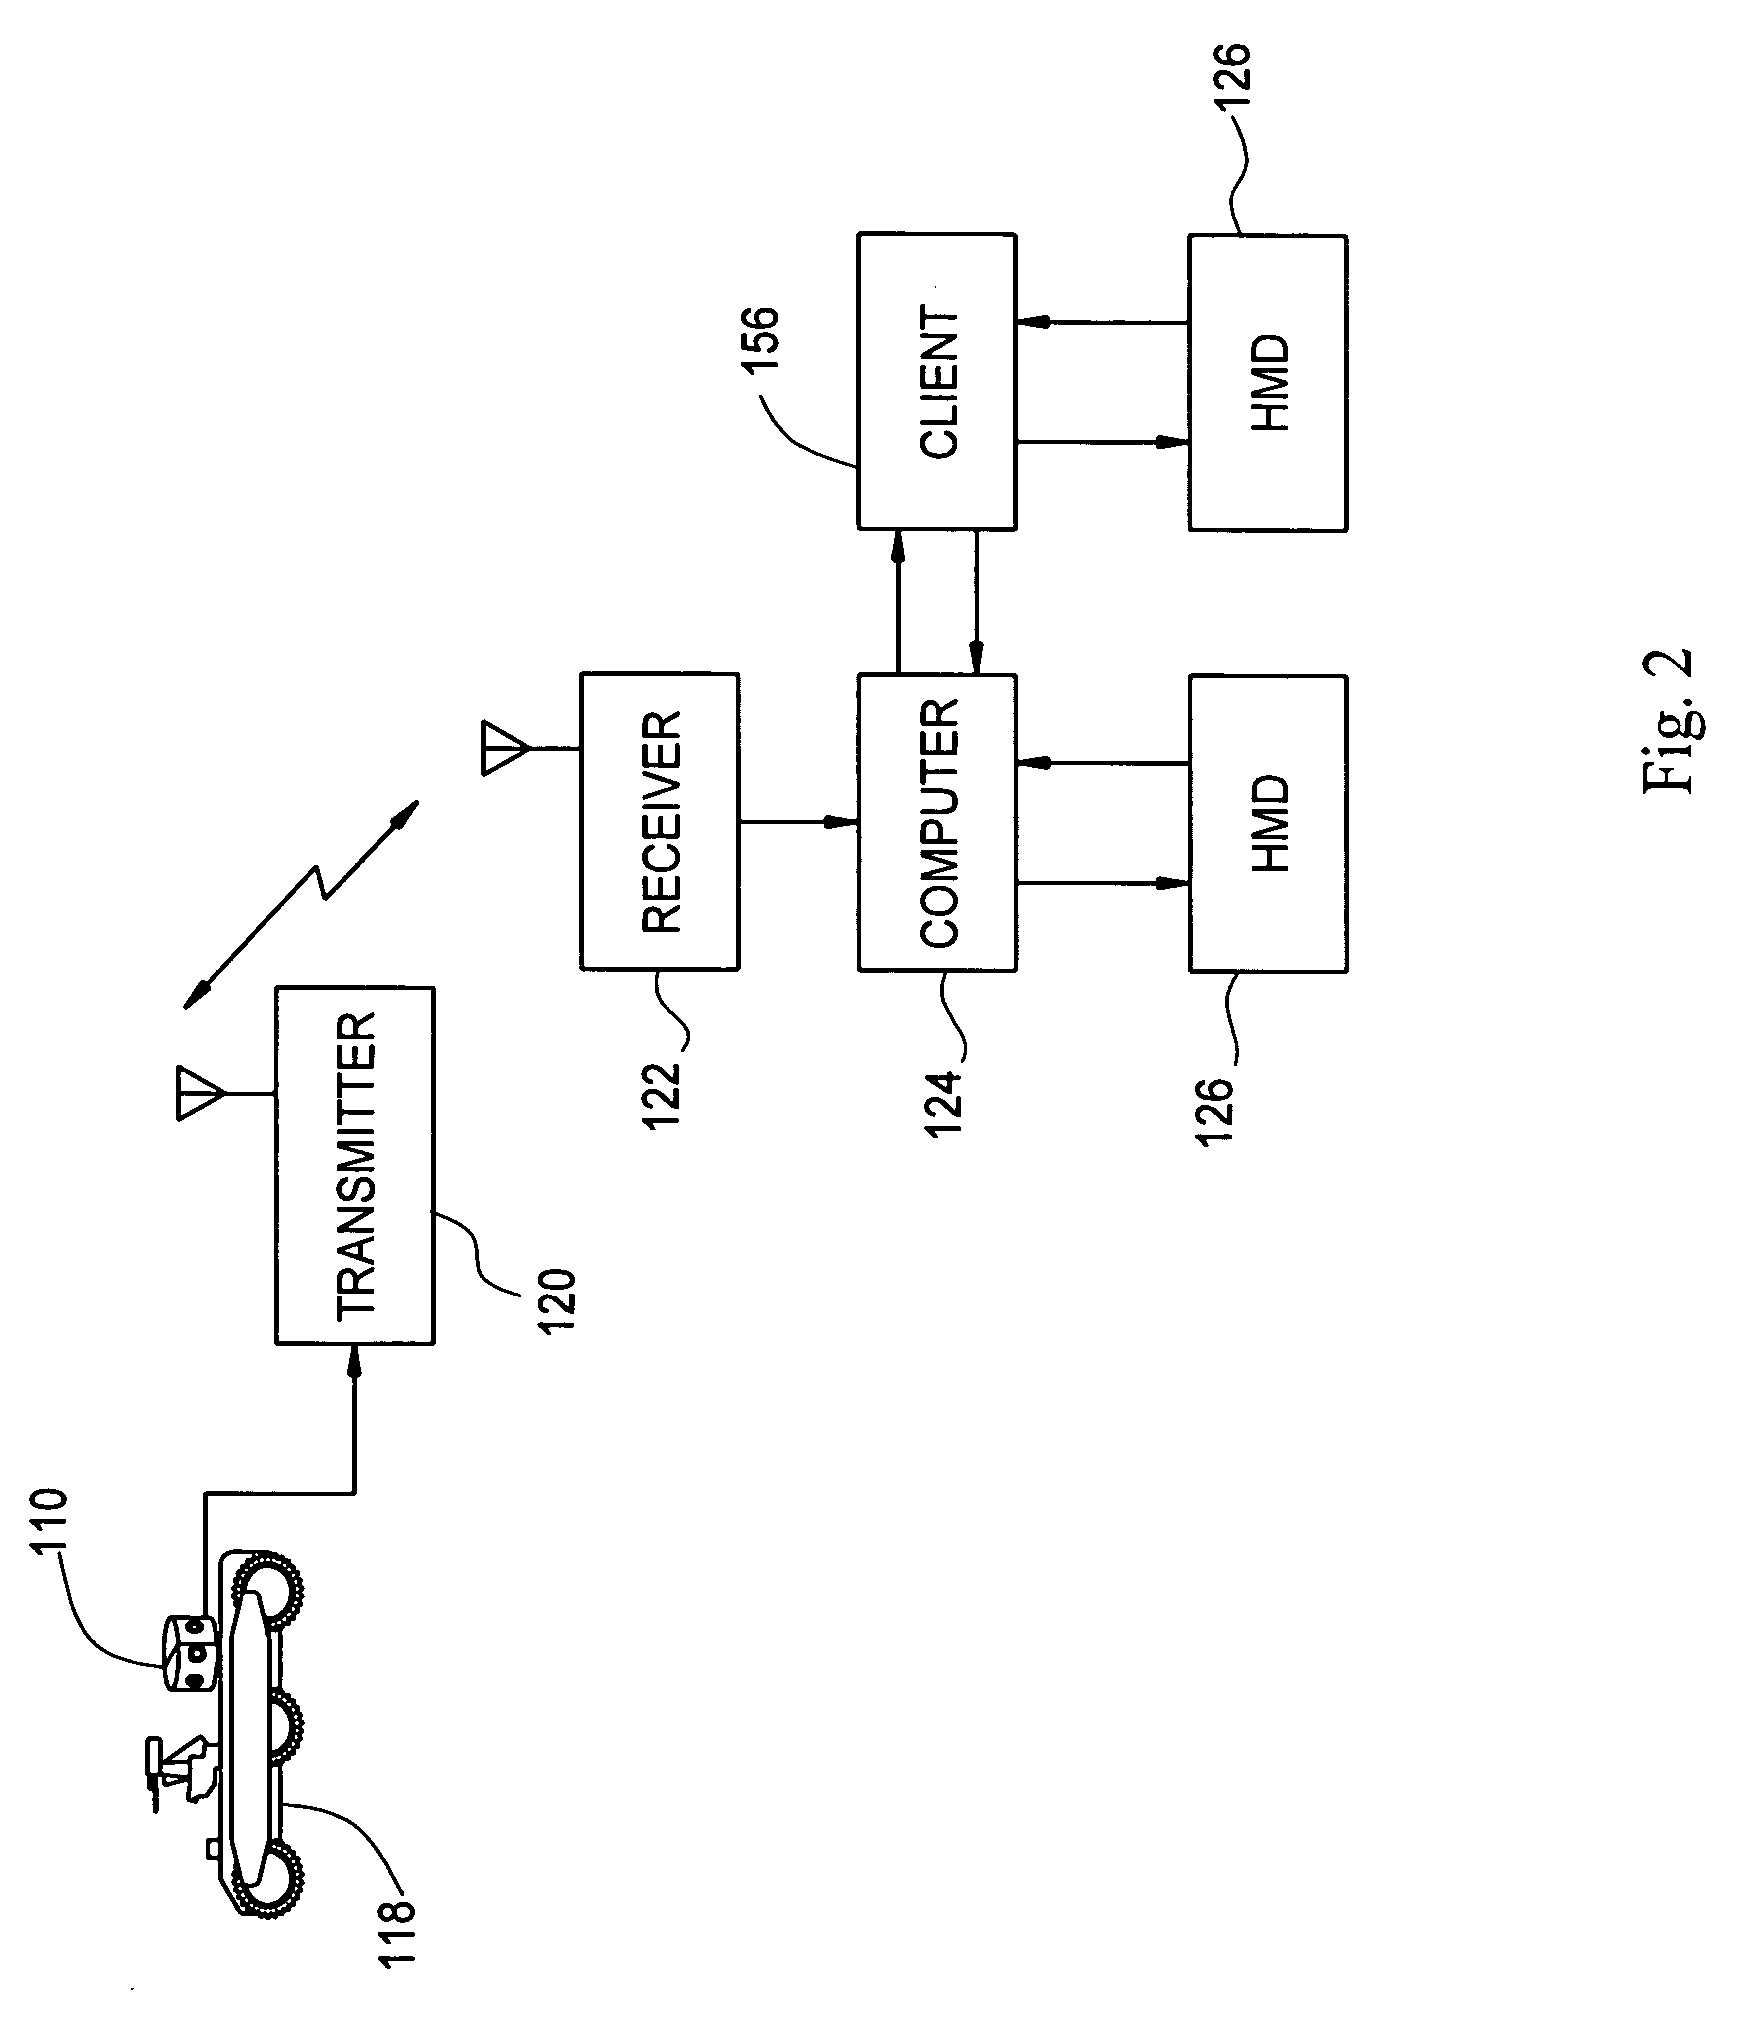 Multi-user stereoscopic 3-D panoramic vision system and method